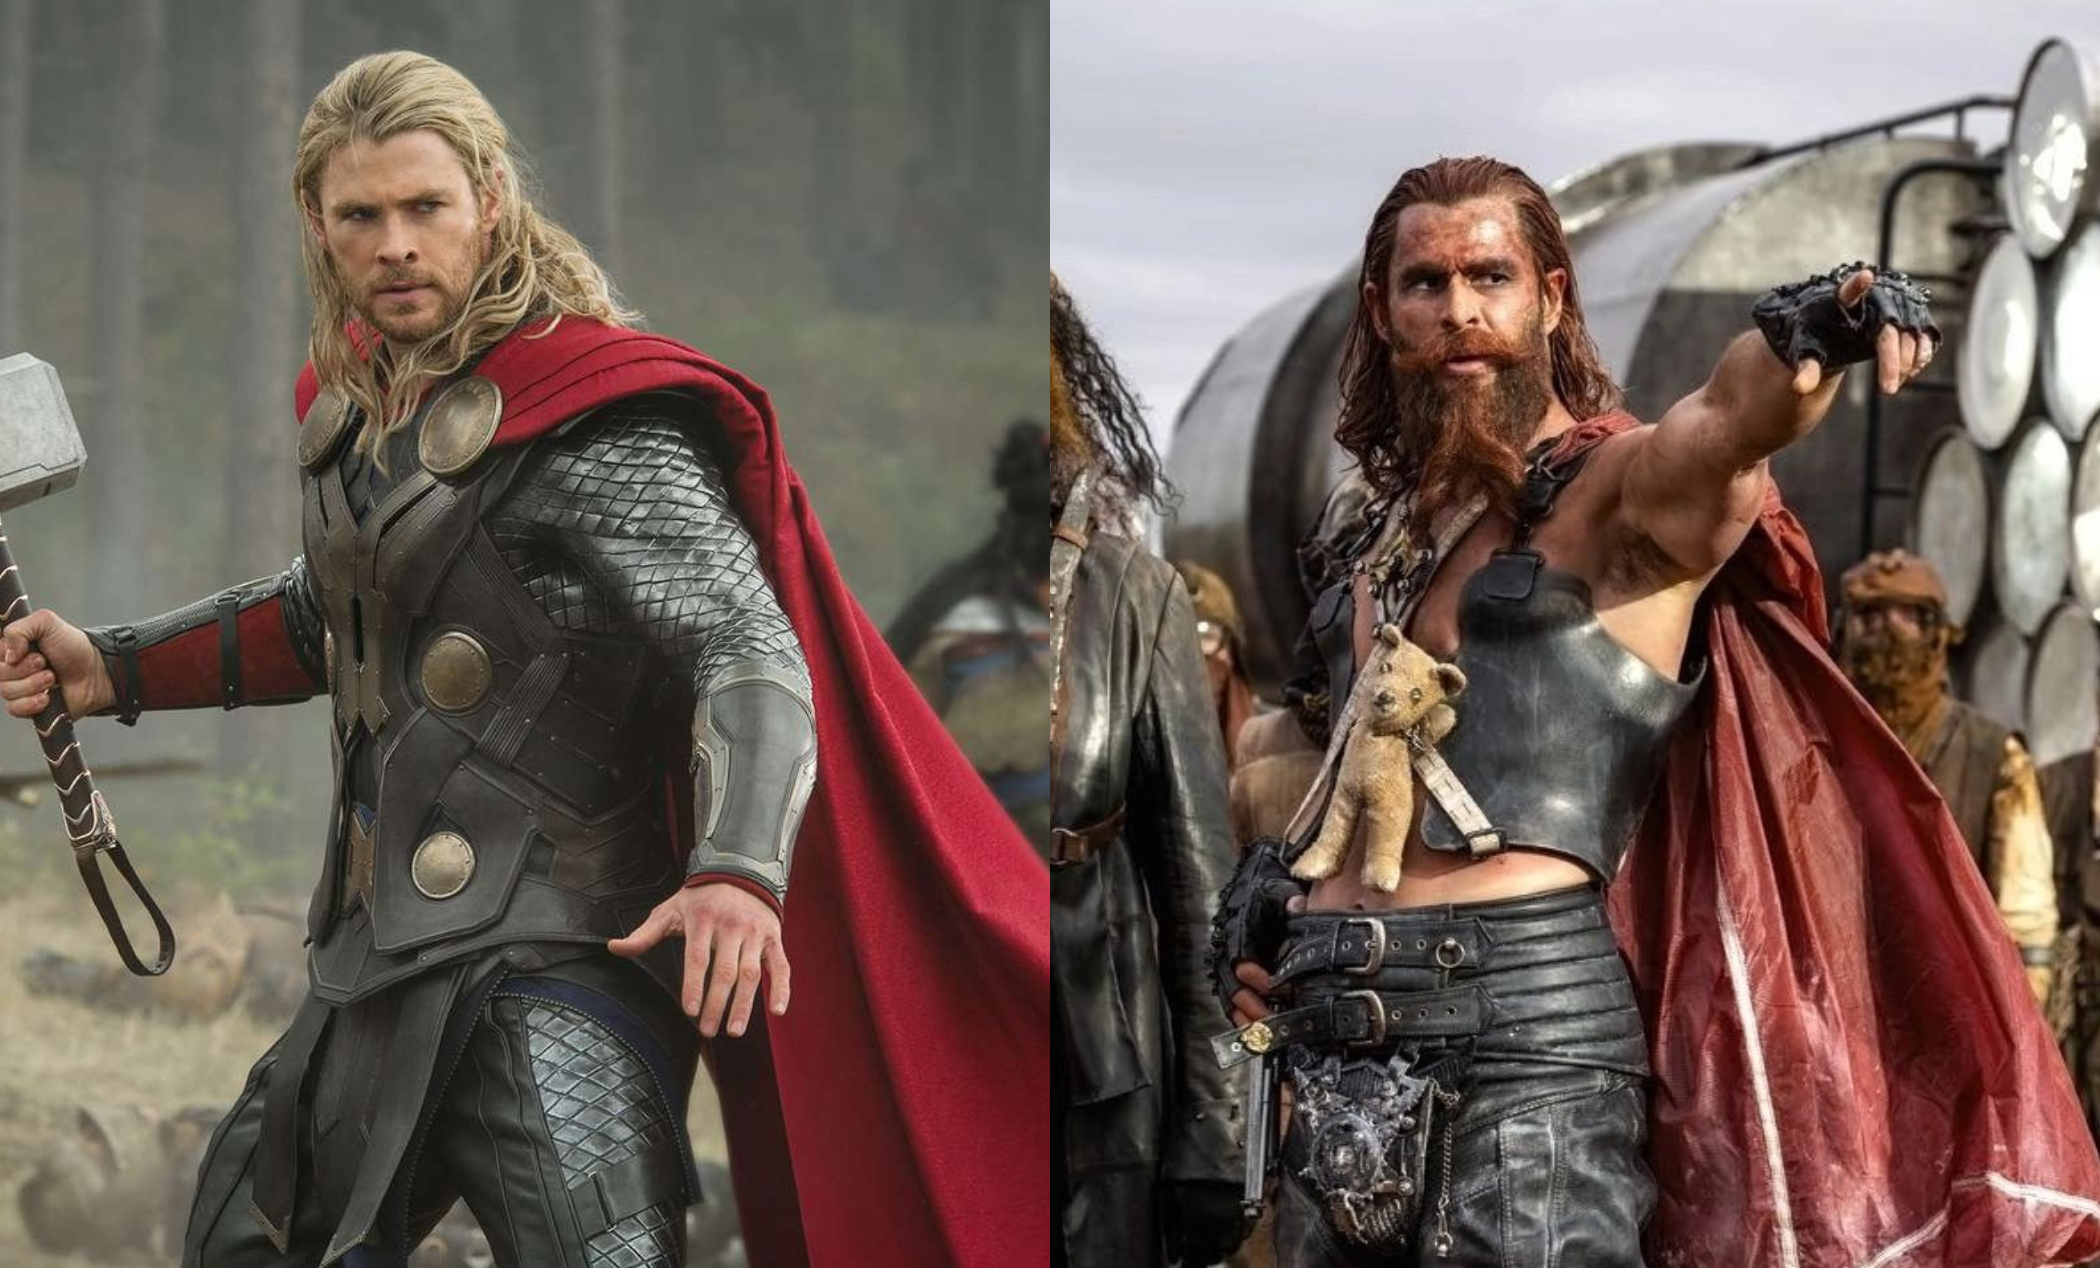 Chris Hemsworth despised wearing capes in Thor and Furiosa: A Mad Max Saga; Says they are so impractical [Video]